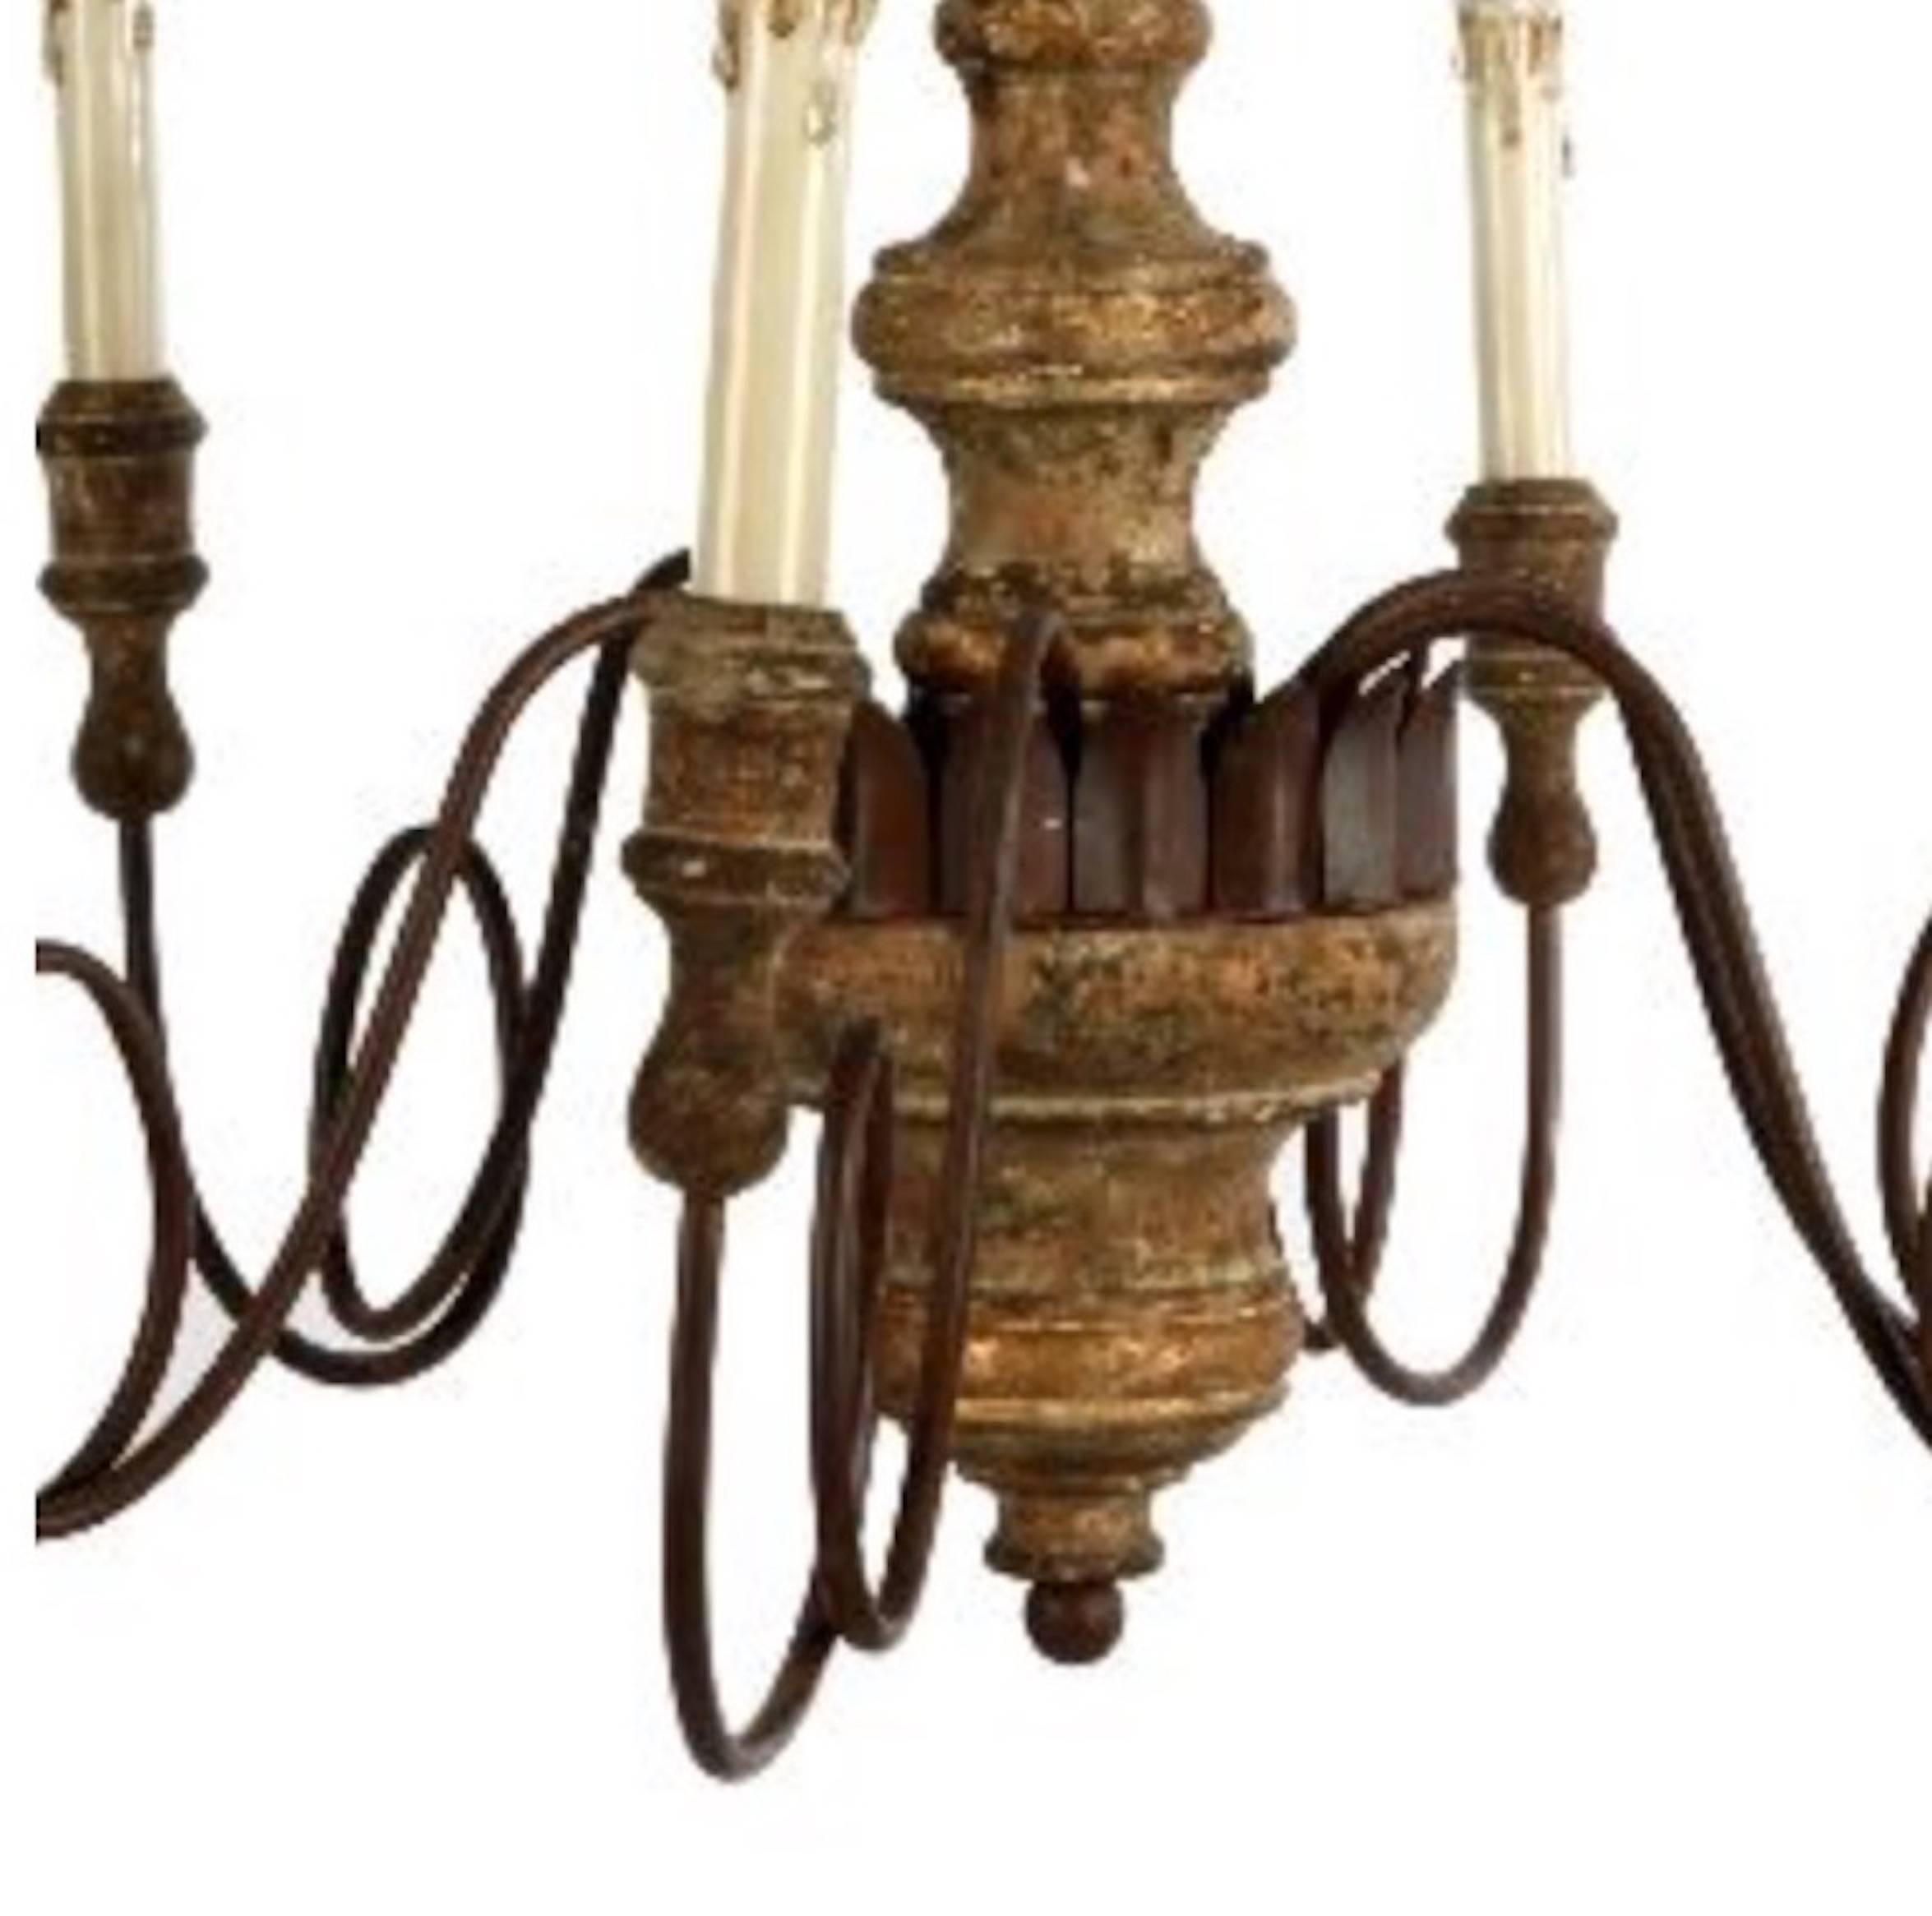 Set of four Italian style carved wood and iron chandeliers with lovely patina. Newly wired and ready for installation, includes chain and canopy assembly.